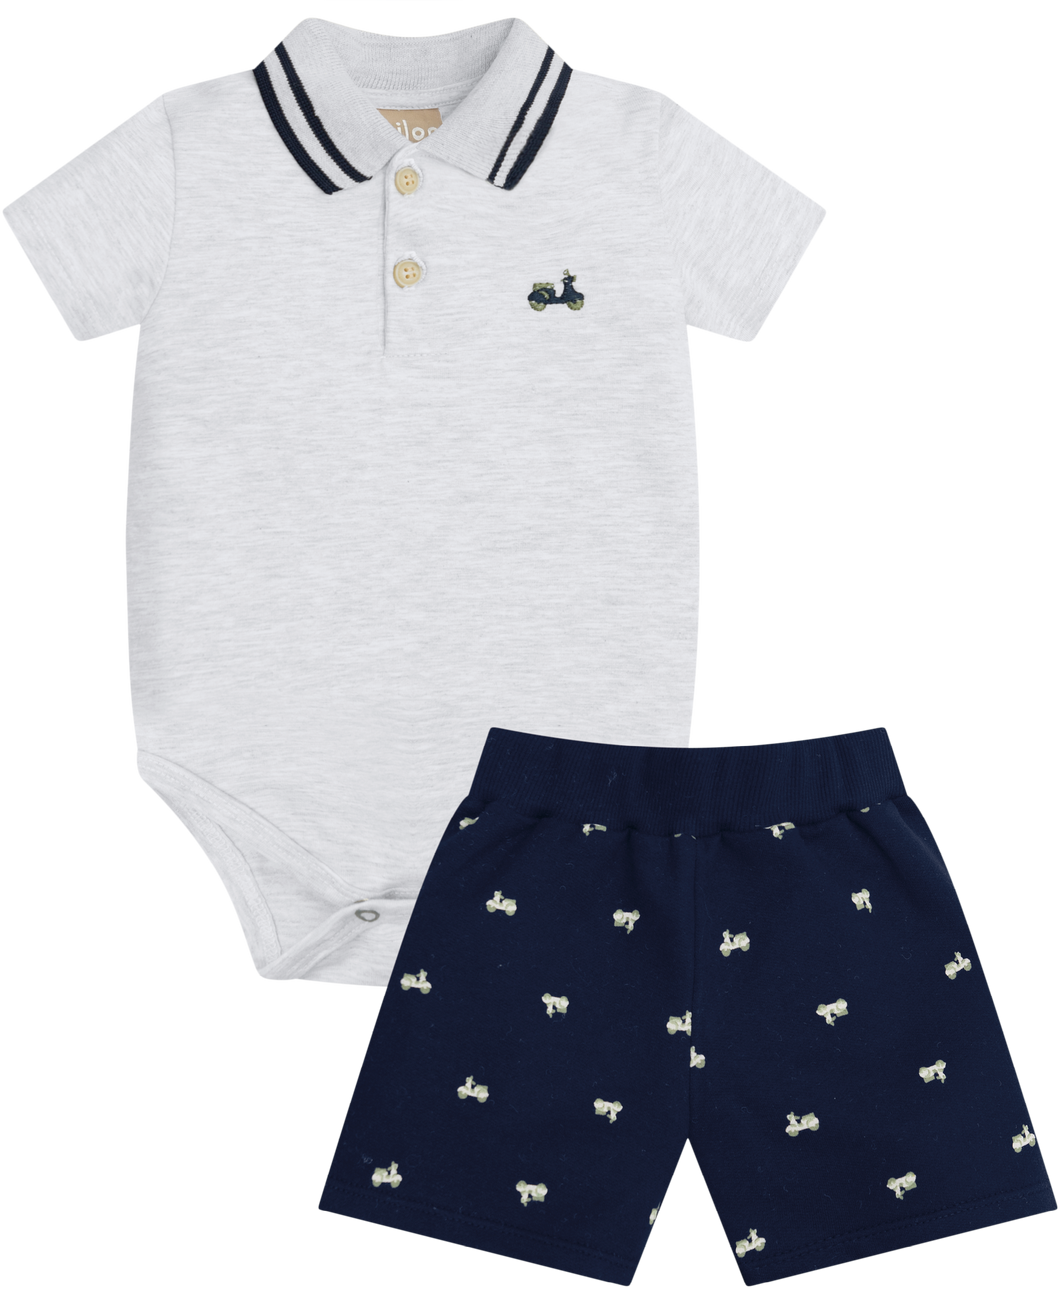 Milon Grey/Navy Polo Collared Onesie with scooter logo